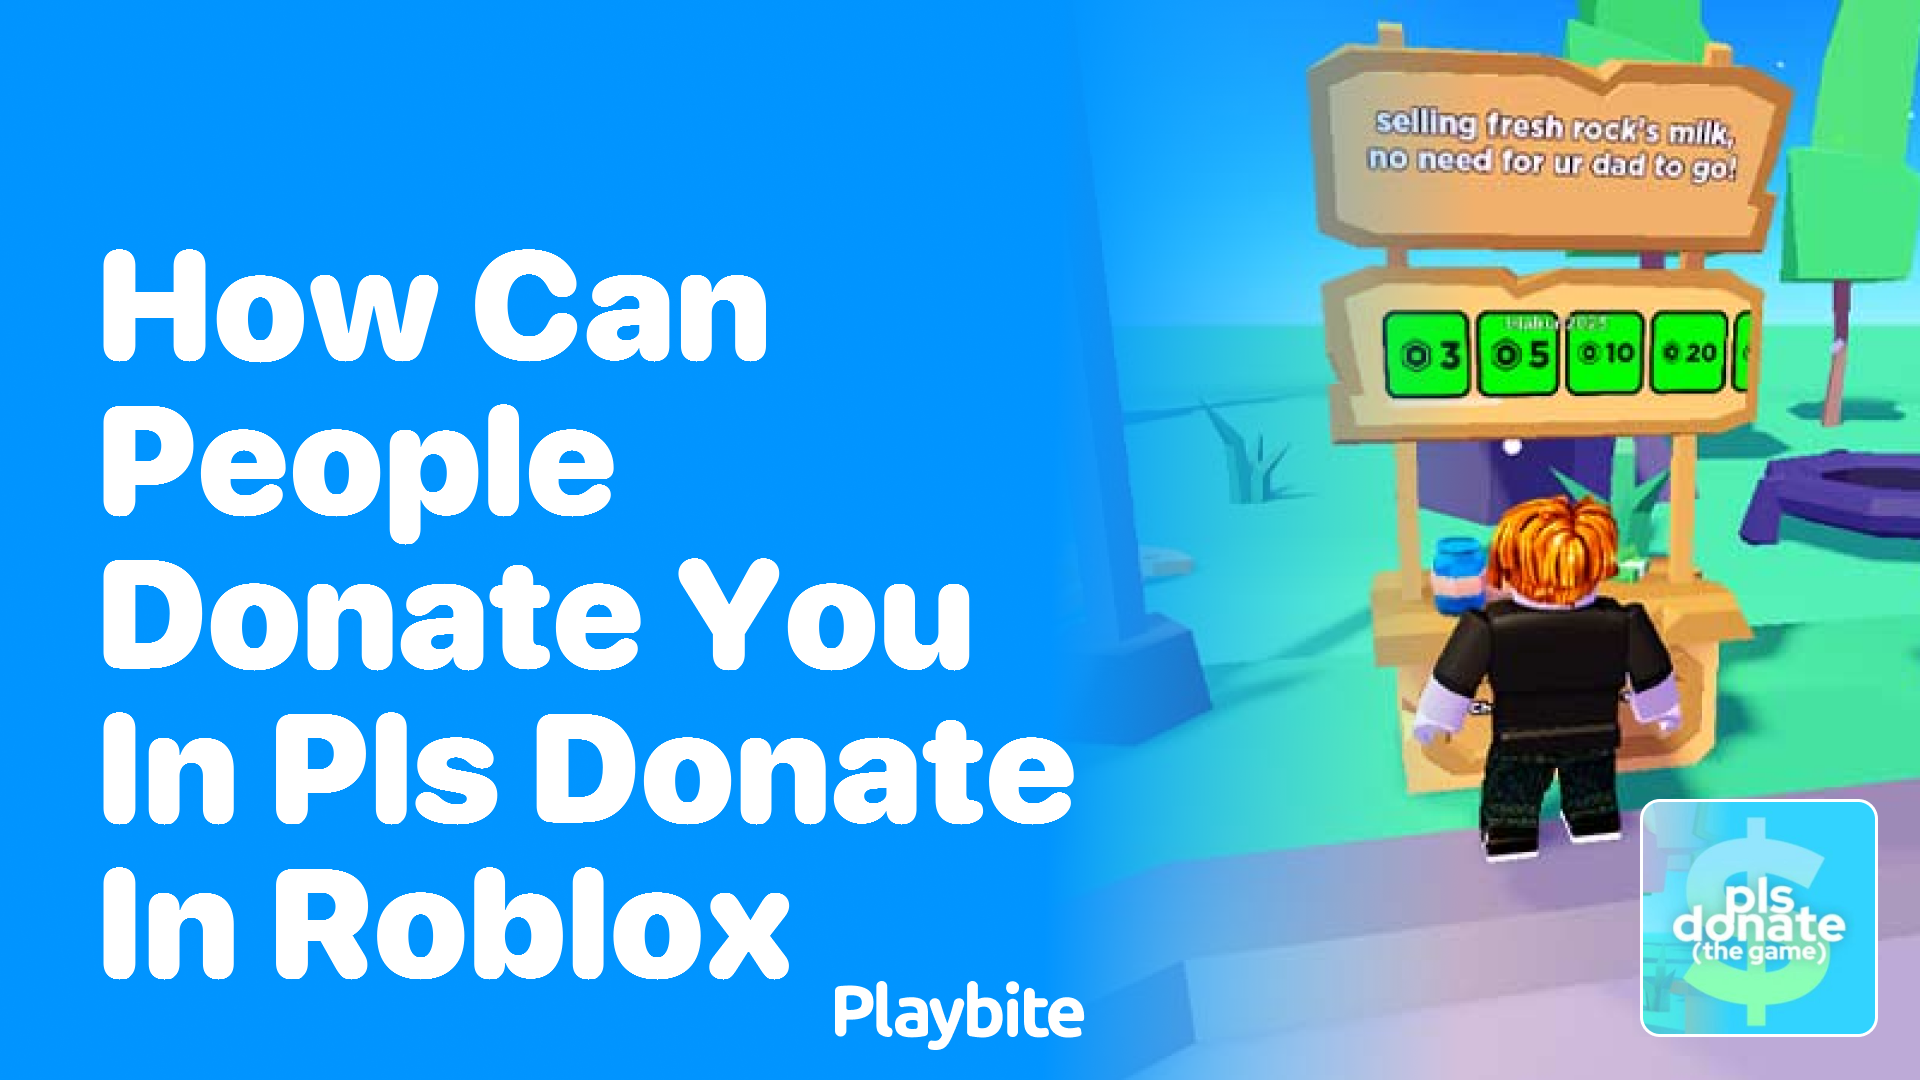 How Can People Donate to You in PLS DONATE on Roblox?